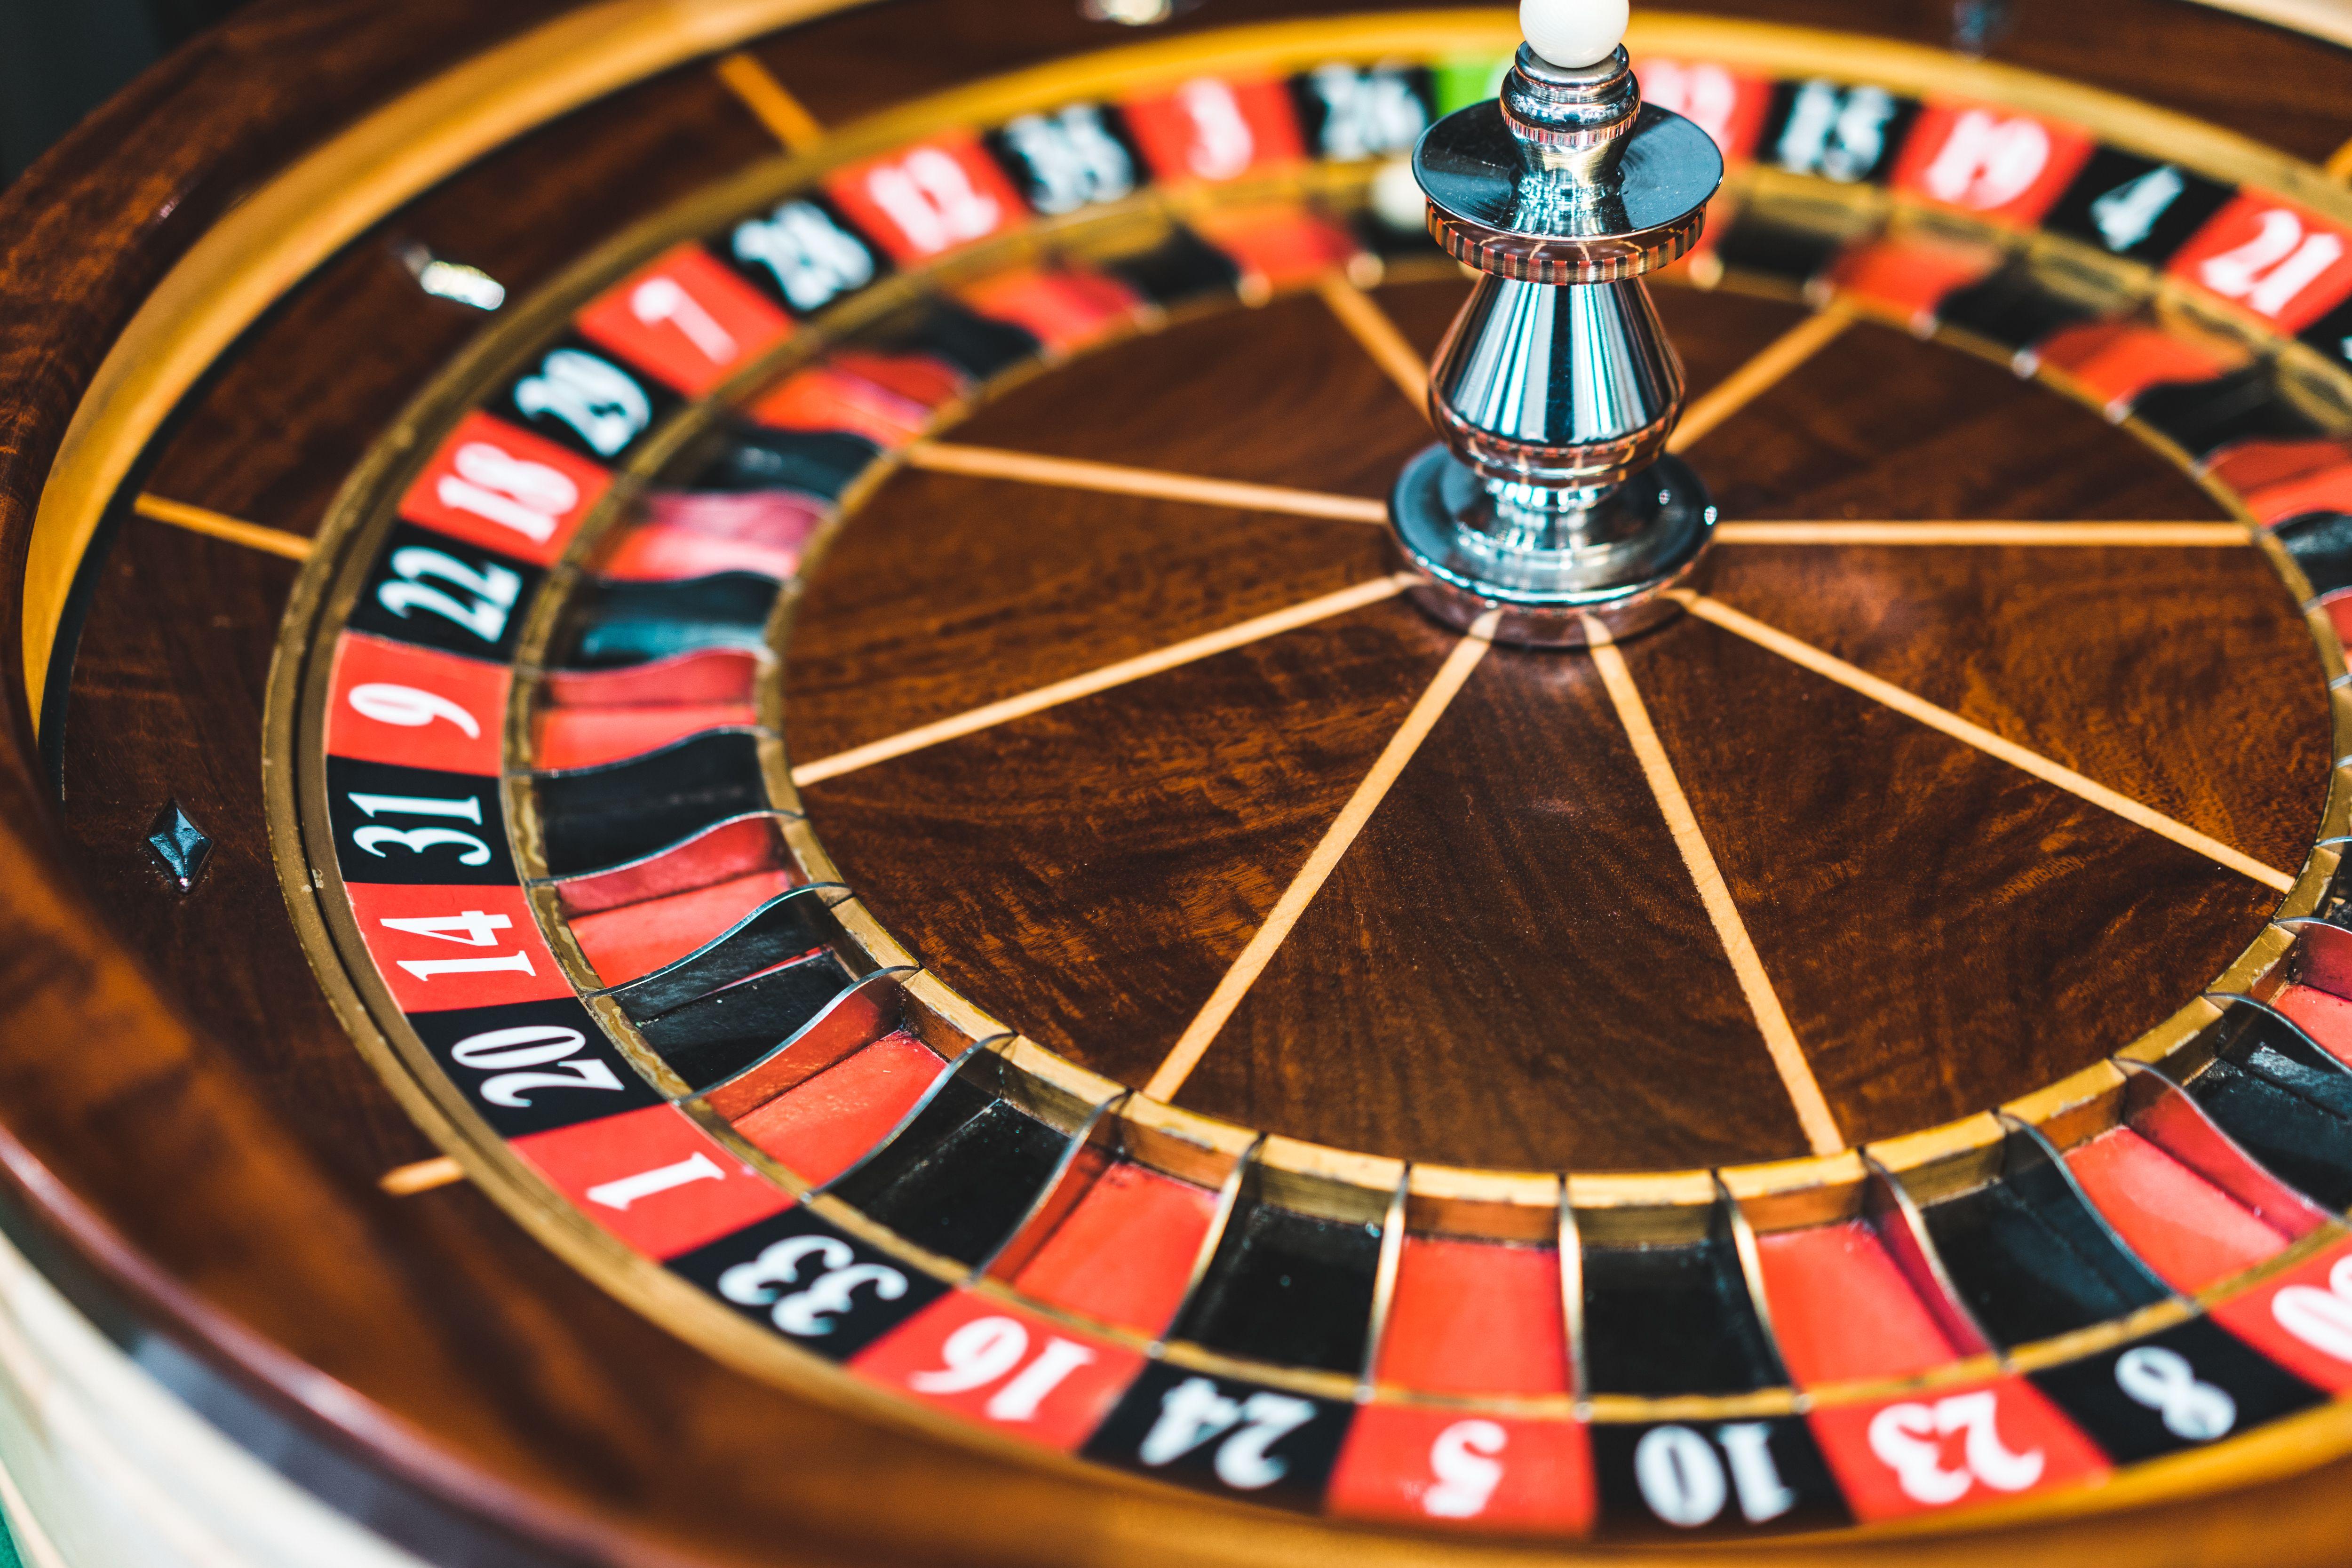 roulette wheel game rules